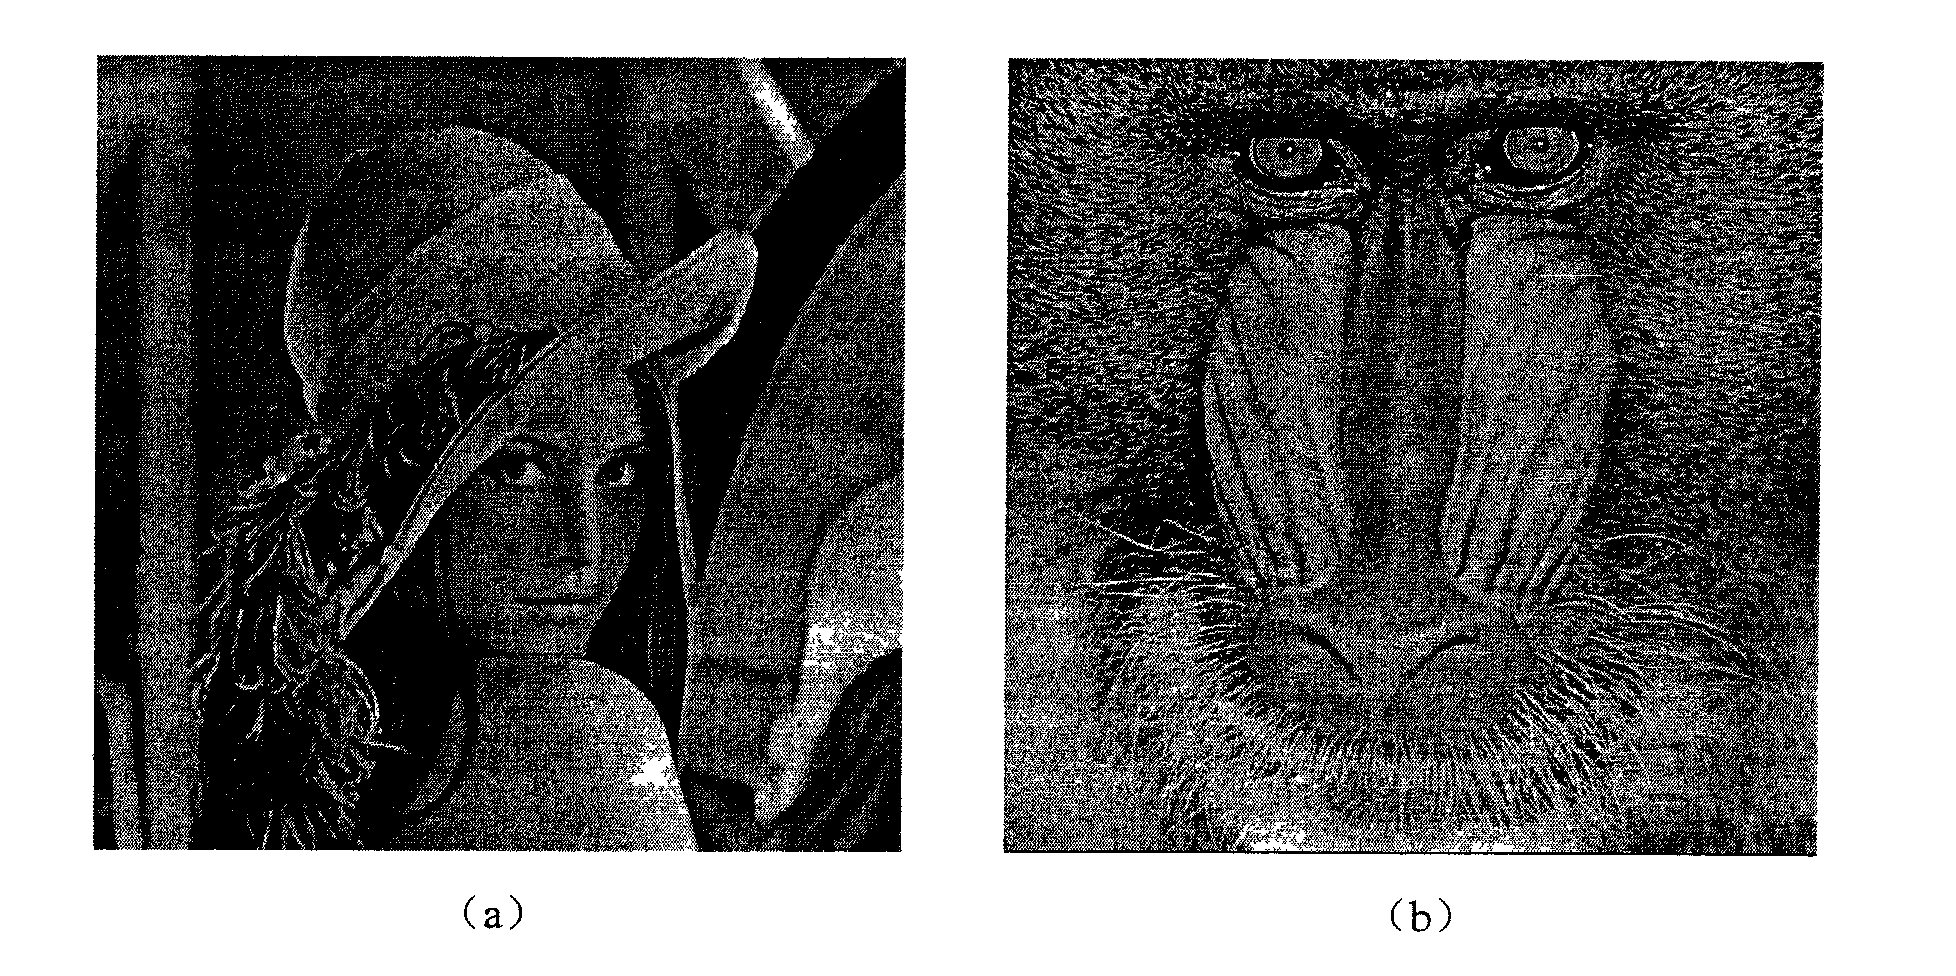 Low code rate image compression method based on down sampling and interpolation